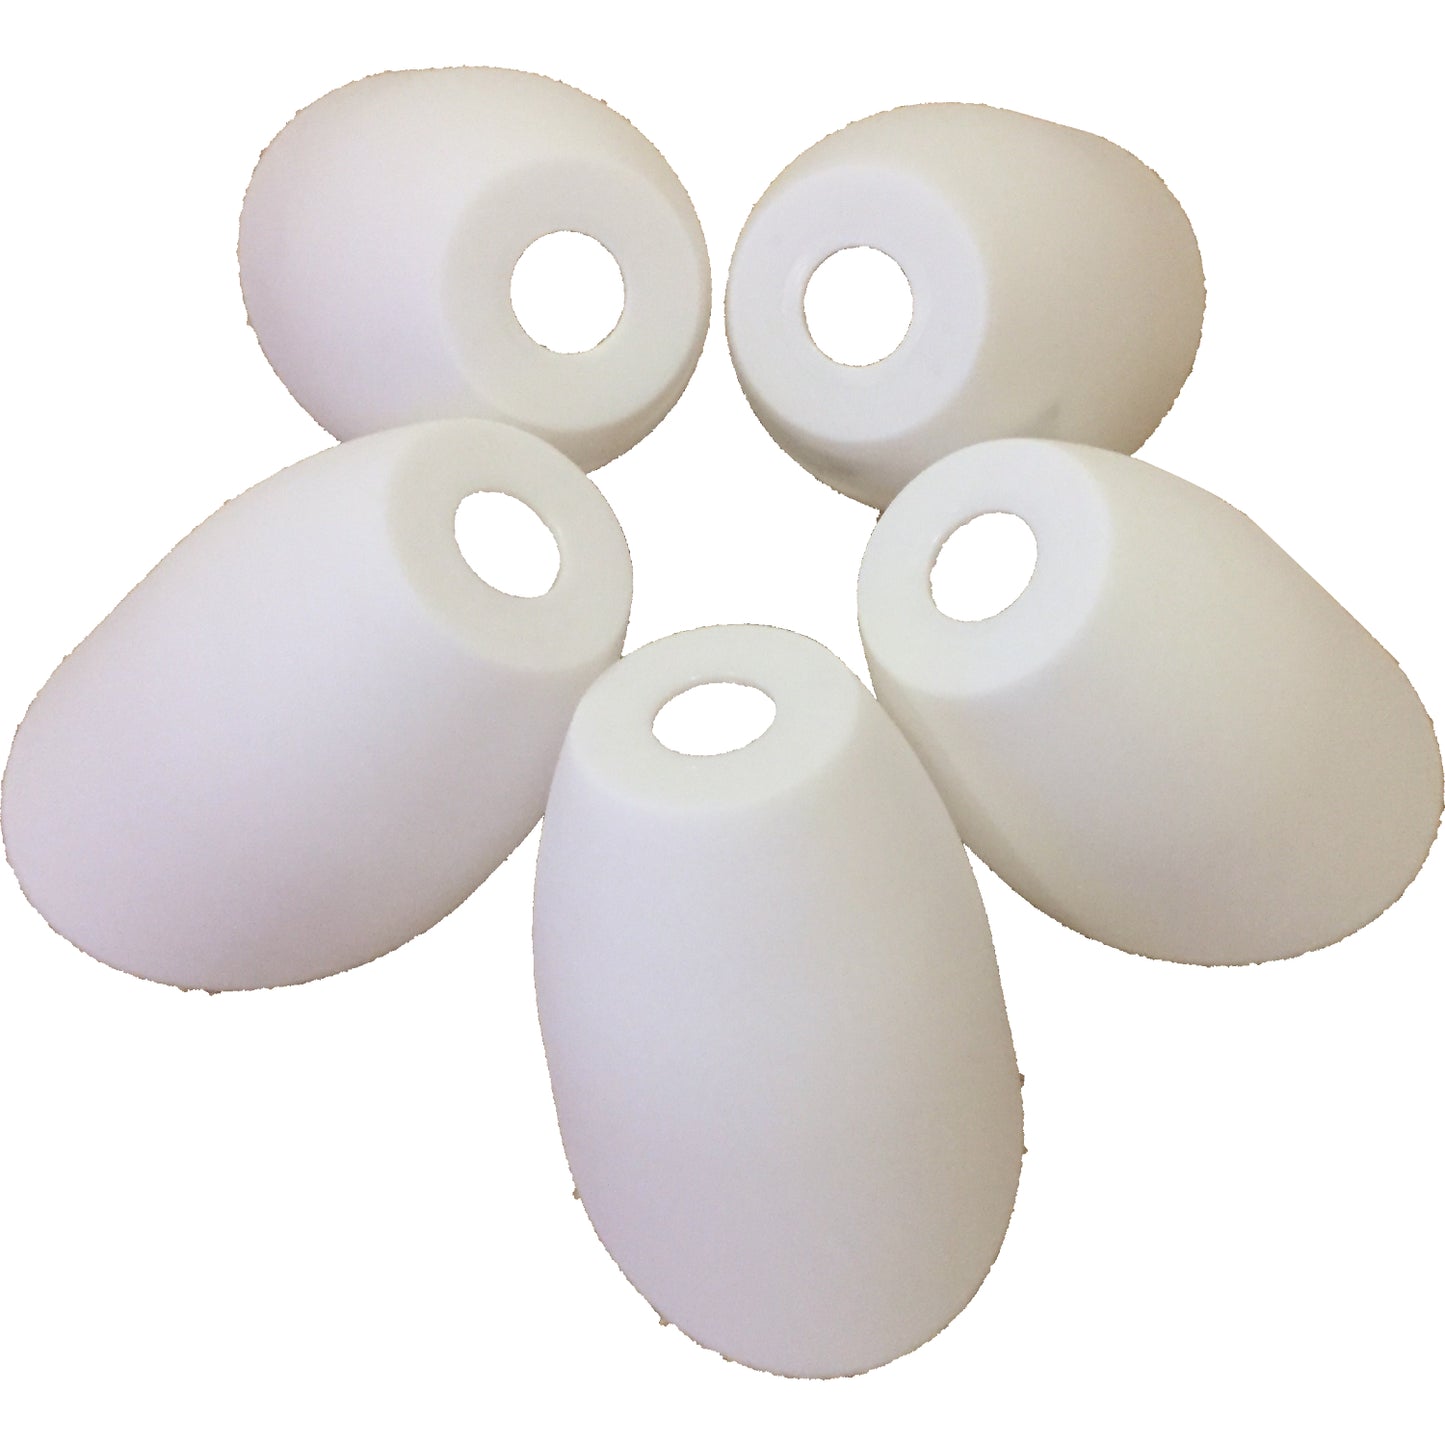 Lightaccents Small Replacement Shades -for Candelabra Base only, Base Hole Dimension: 0.83 inches (21 mm) - White Acrylic Shades (Model 16197-98) (Set of 5)